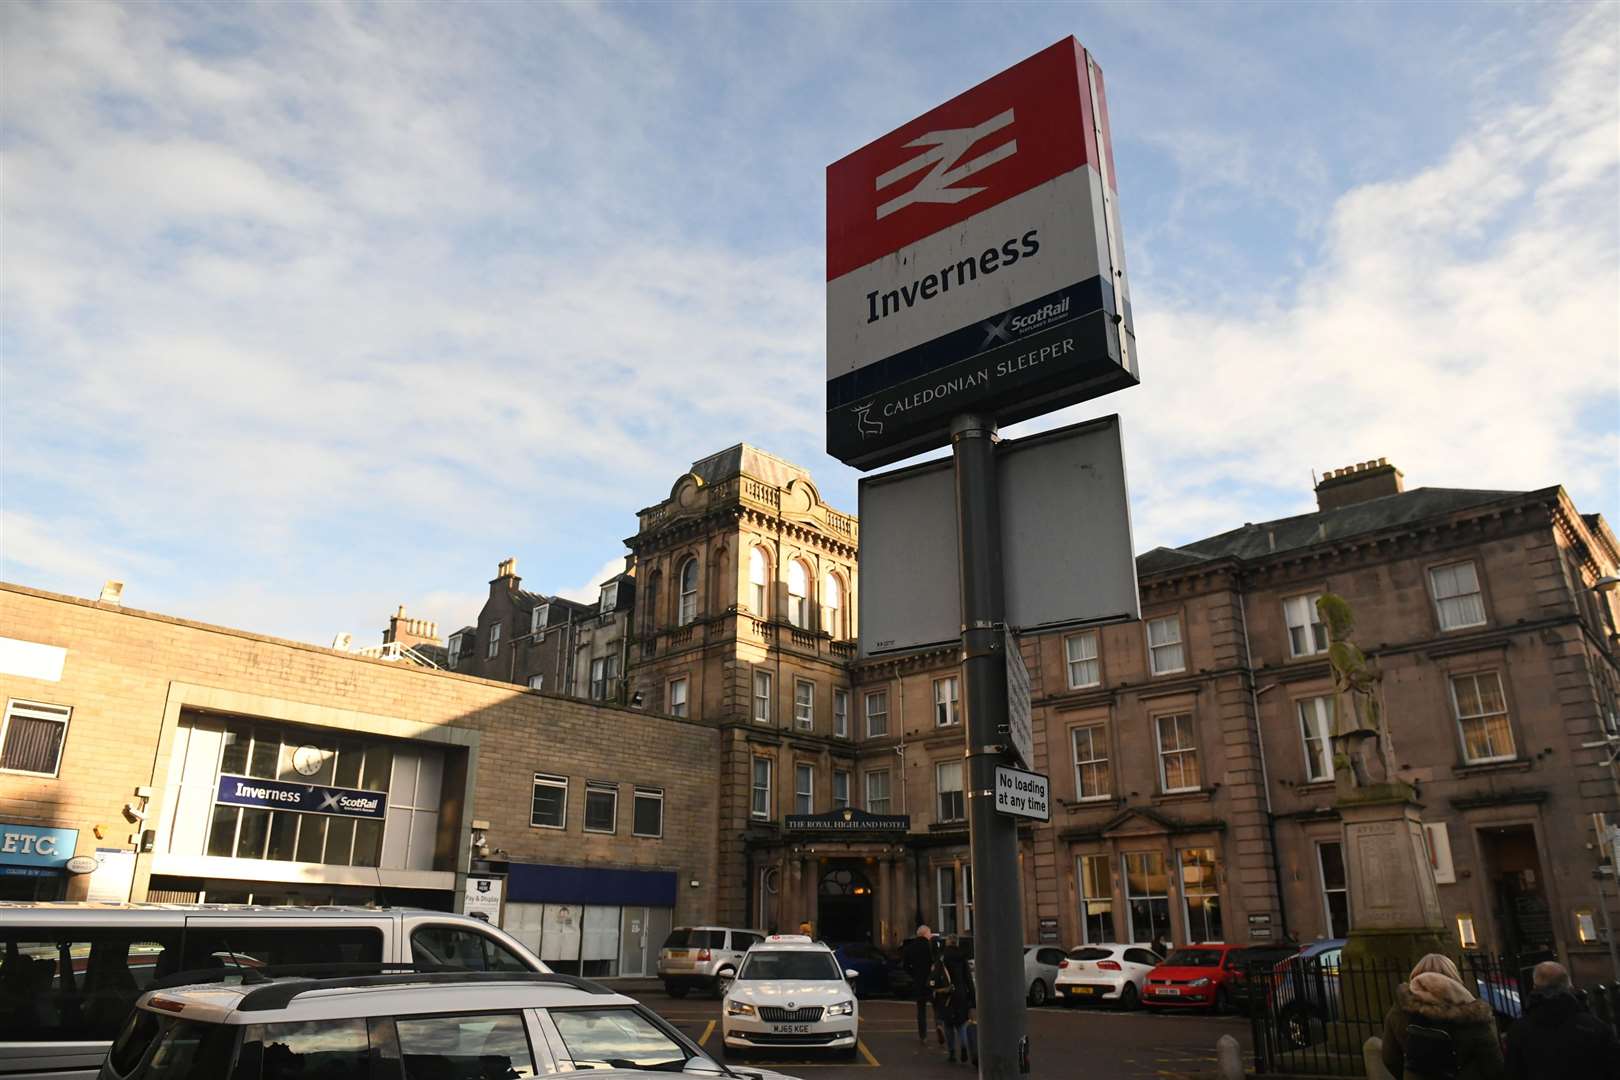 Alternative road transport will be offered to passengers to get them to Edinburgh.